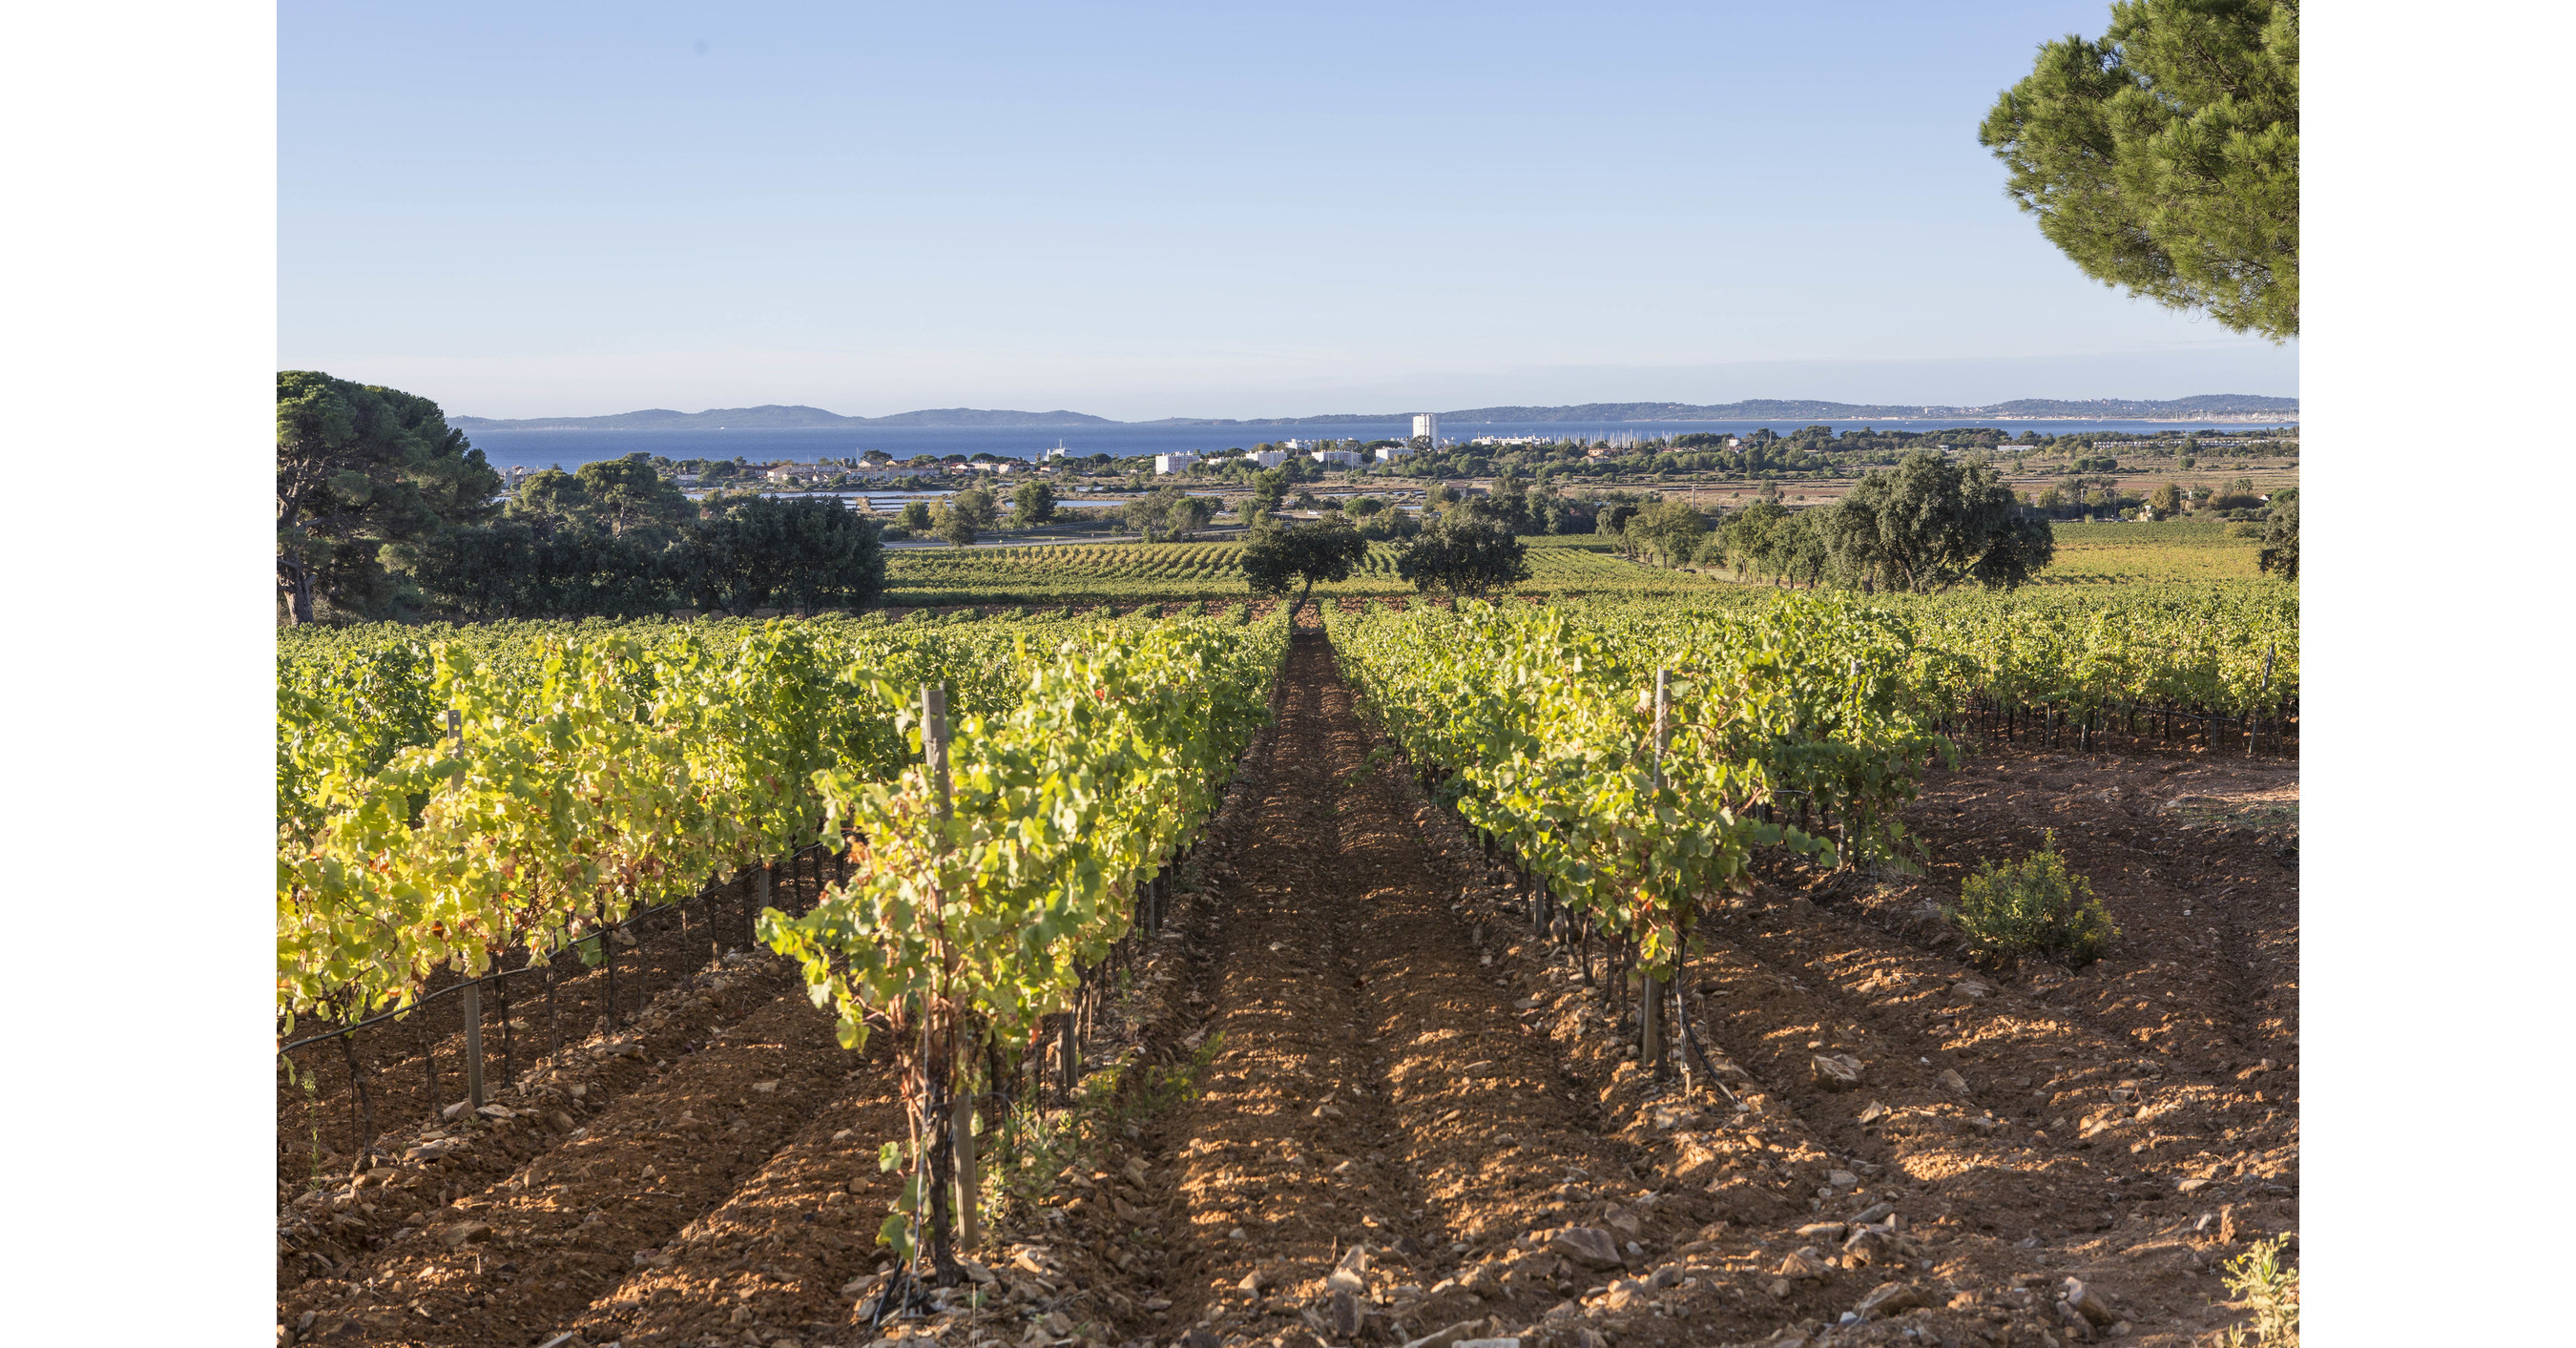 Discover wines from Chateau Galoupet